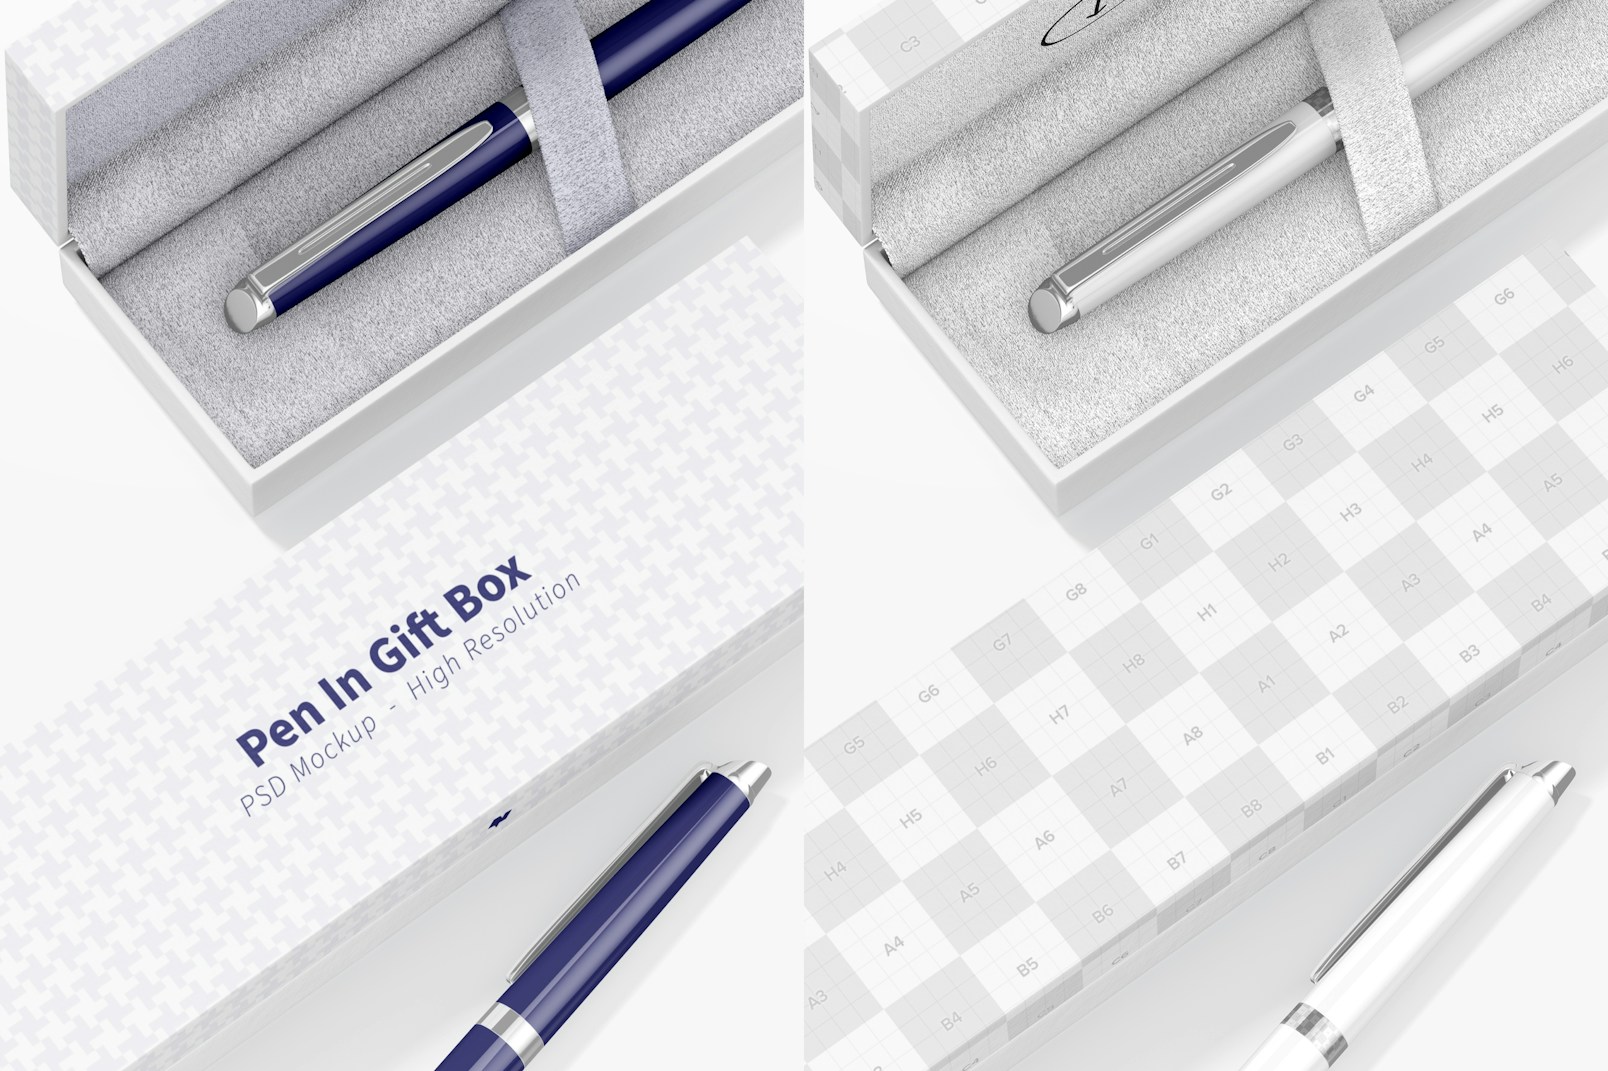 Pen In Gift Boxes Mockup, Close Up